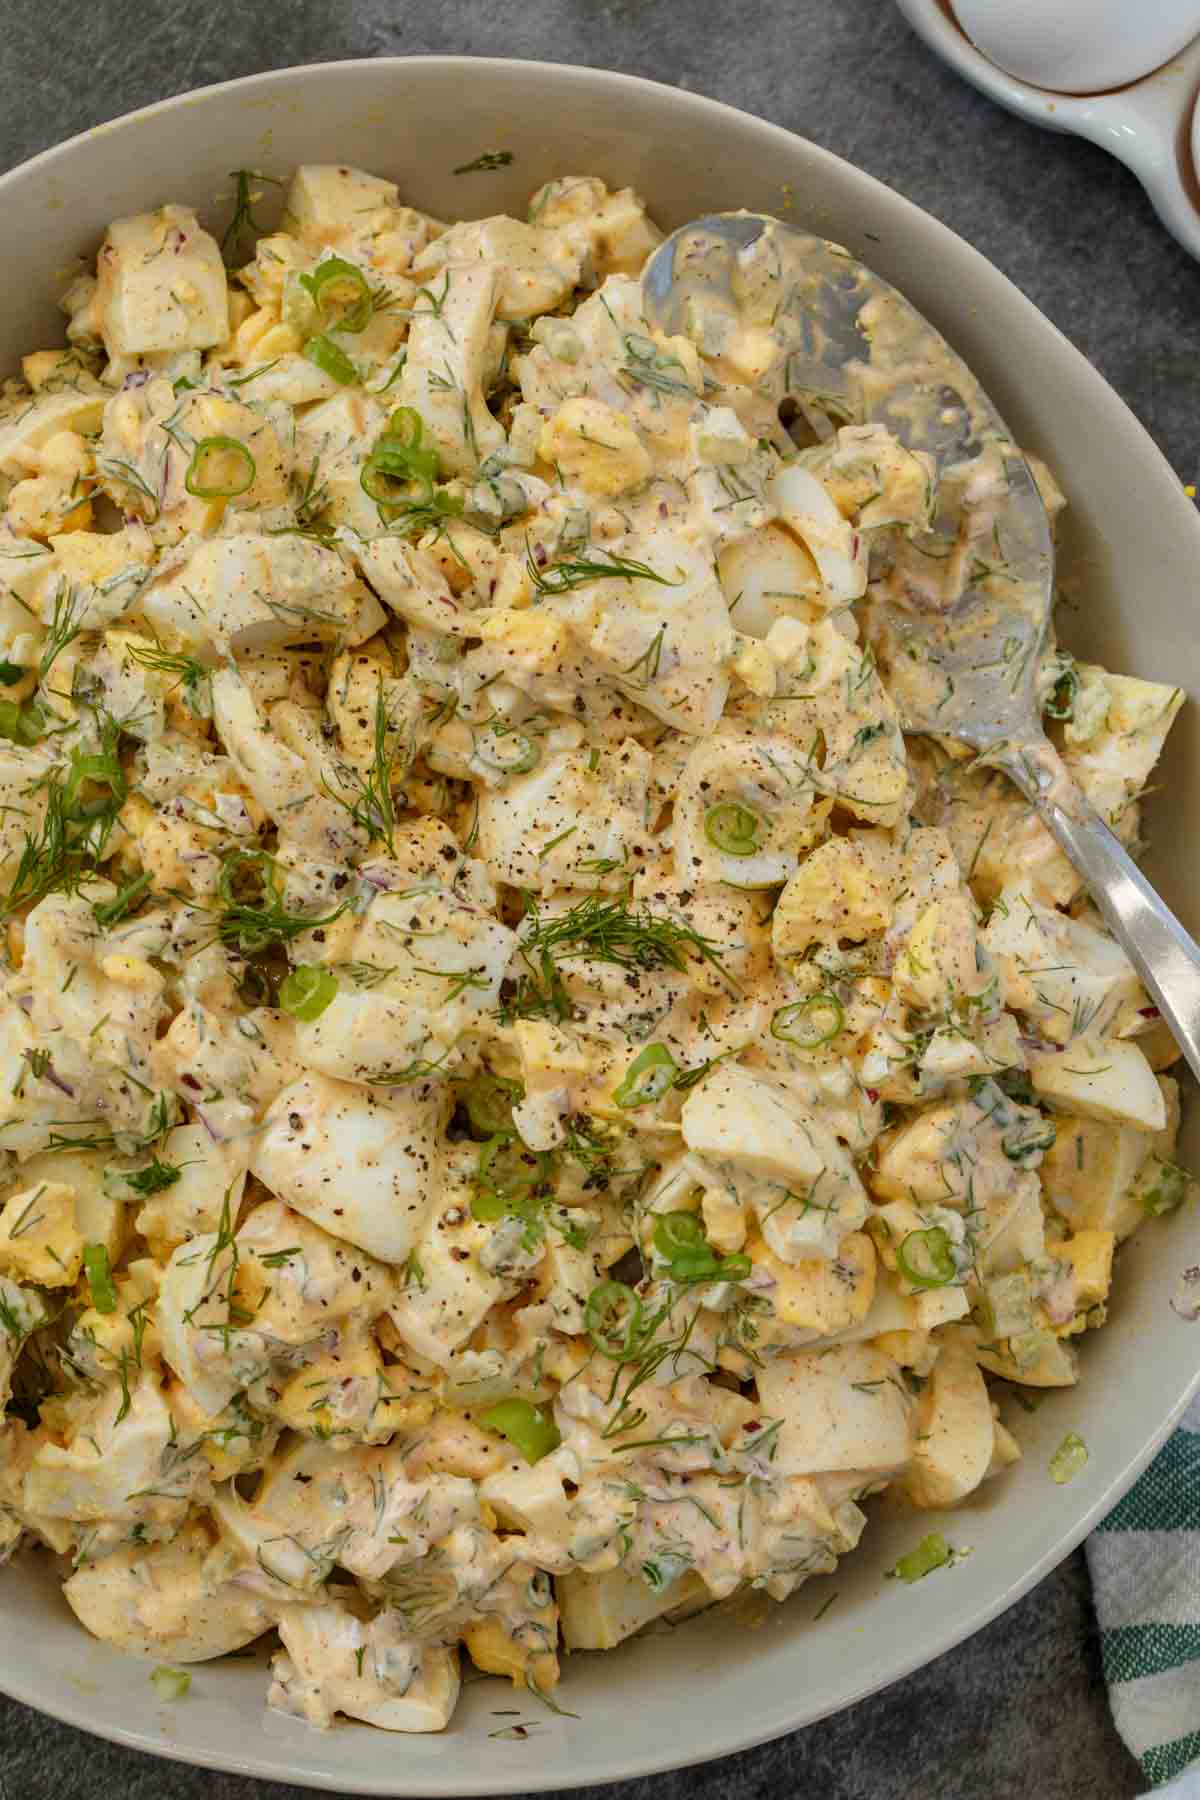 A gray bowl of egg salad with a silver spoon in it.